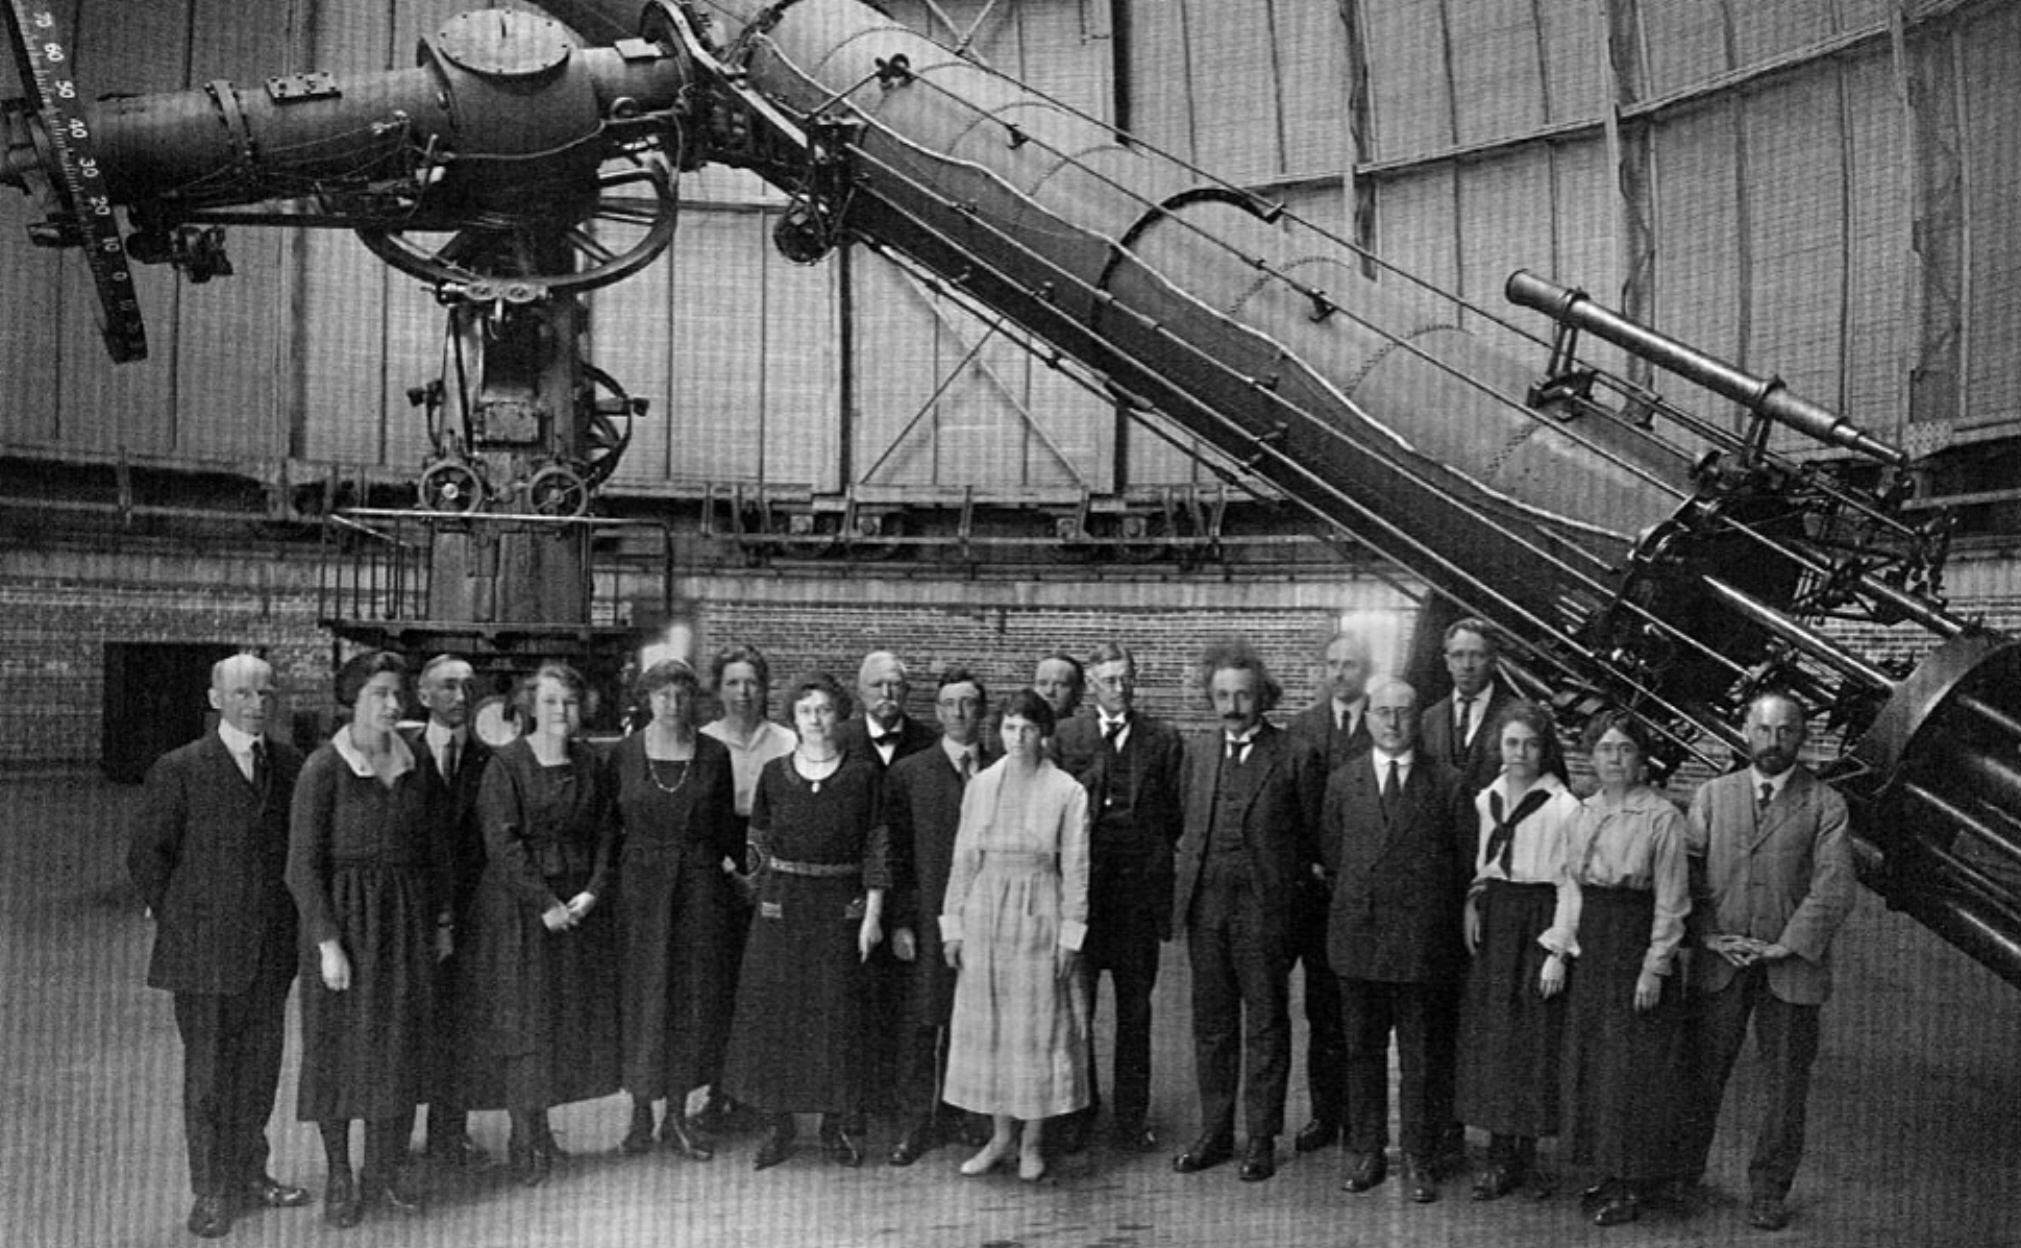 A group of individuals, including Albert Einstein, who is just to the right of center, standing for a formal portrait in front of the Yerkes Telescope, within the dome.